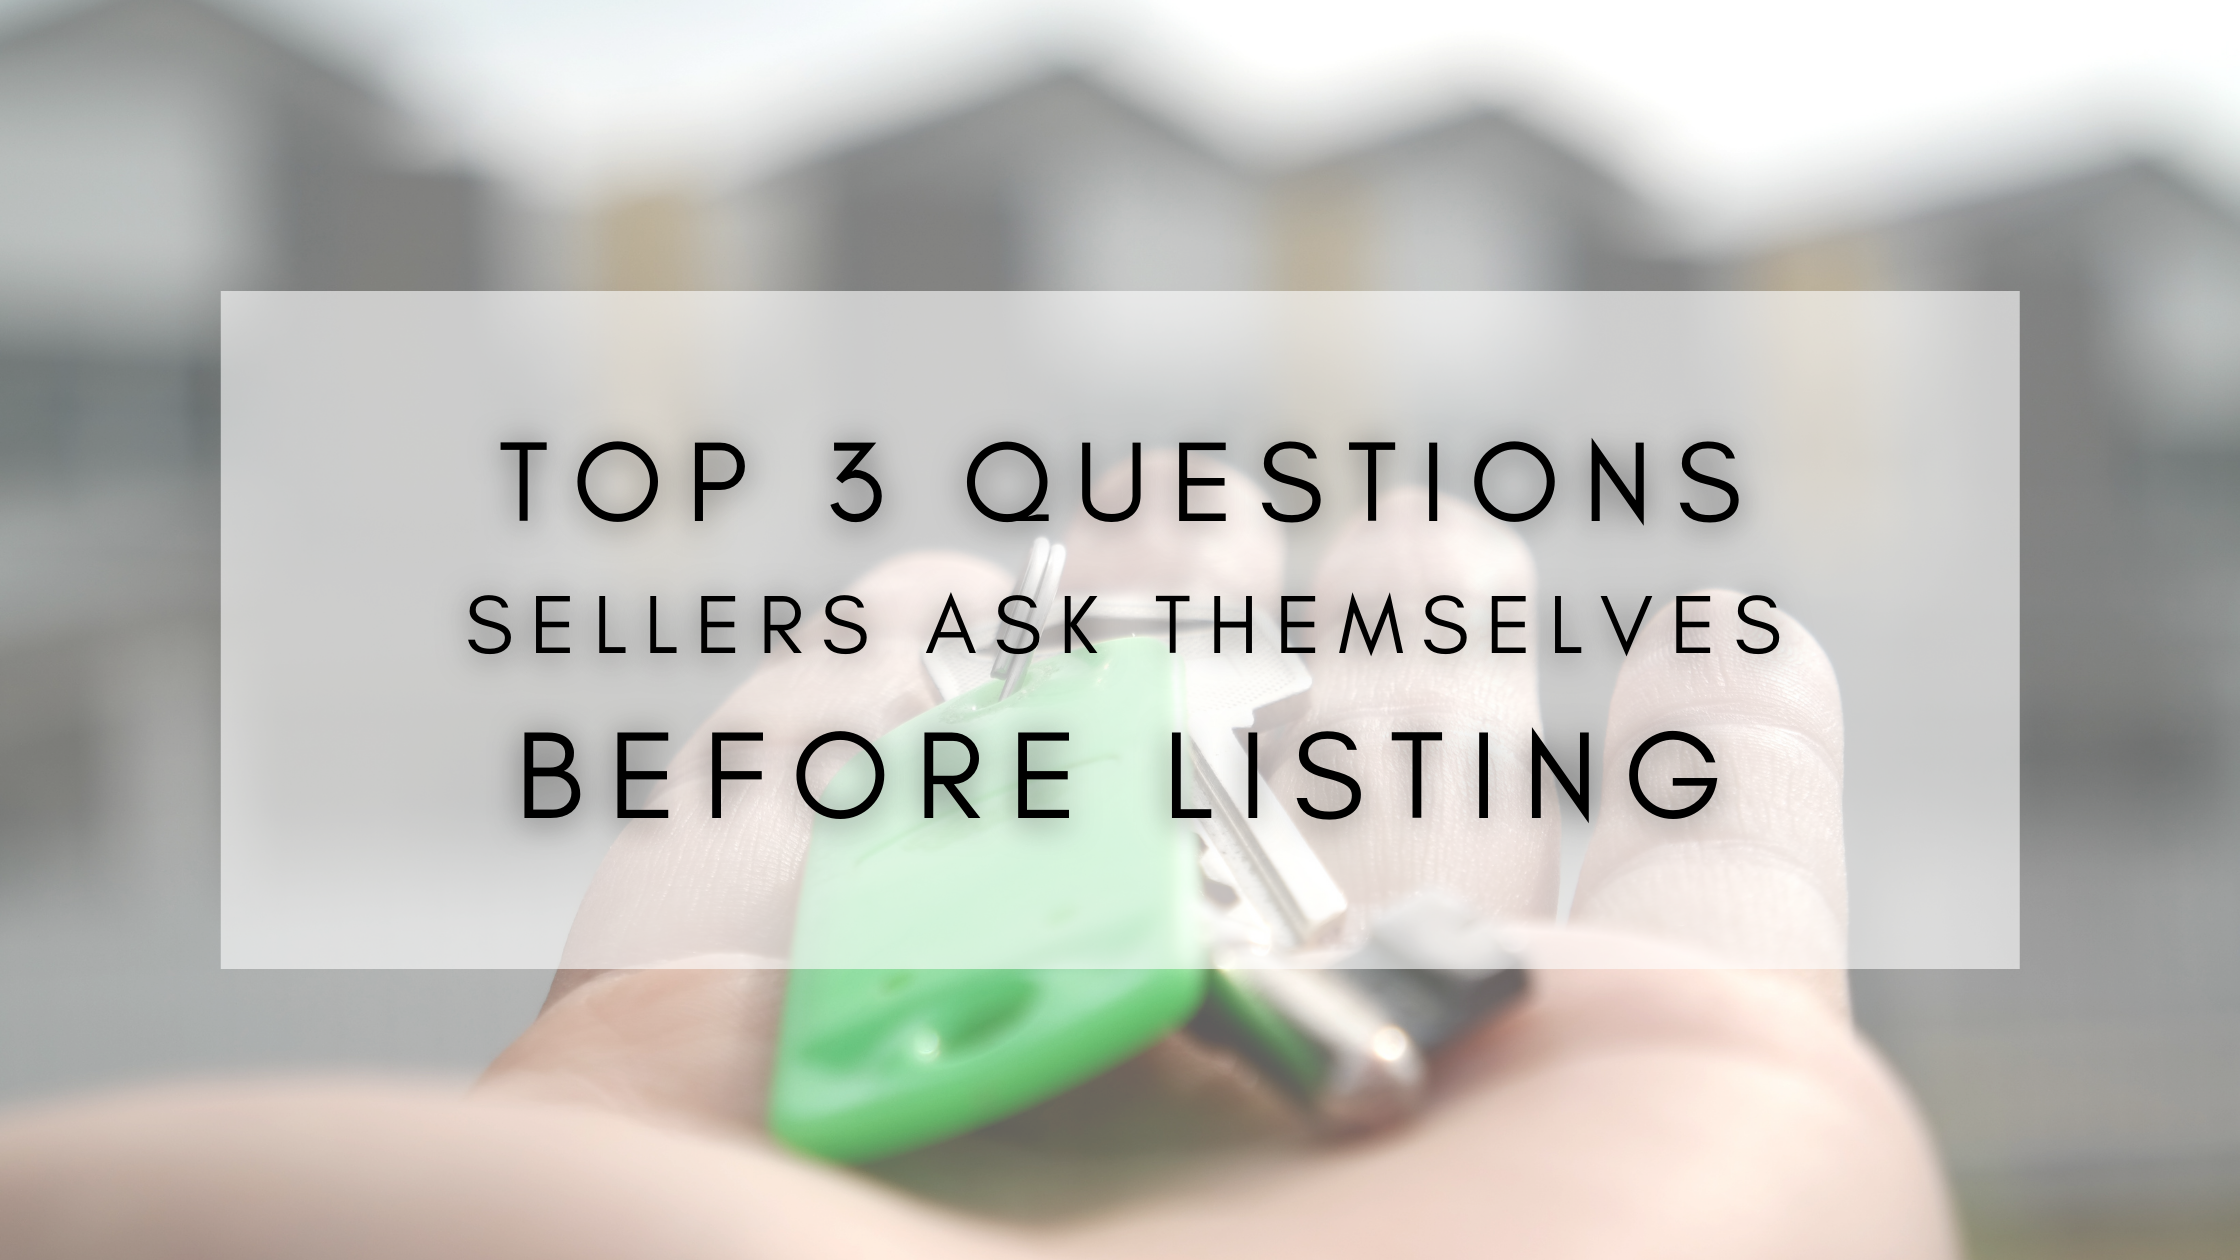 Top 3 Questions Sellers Ask Themselves Before Listing